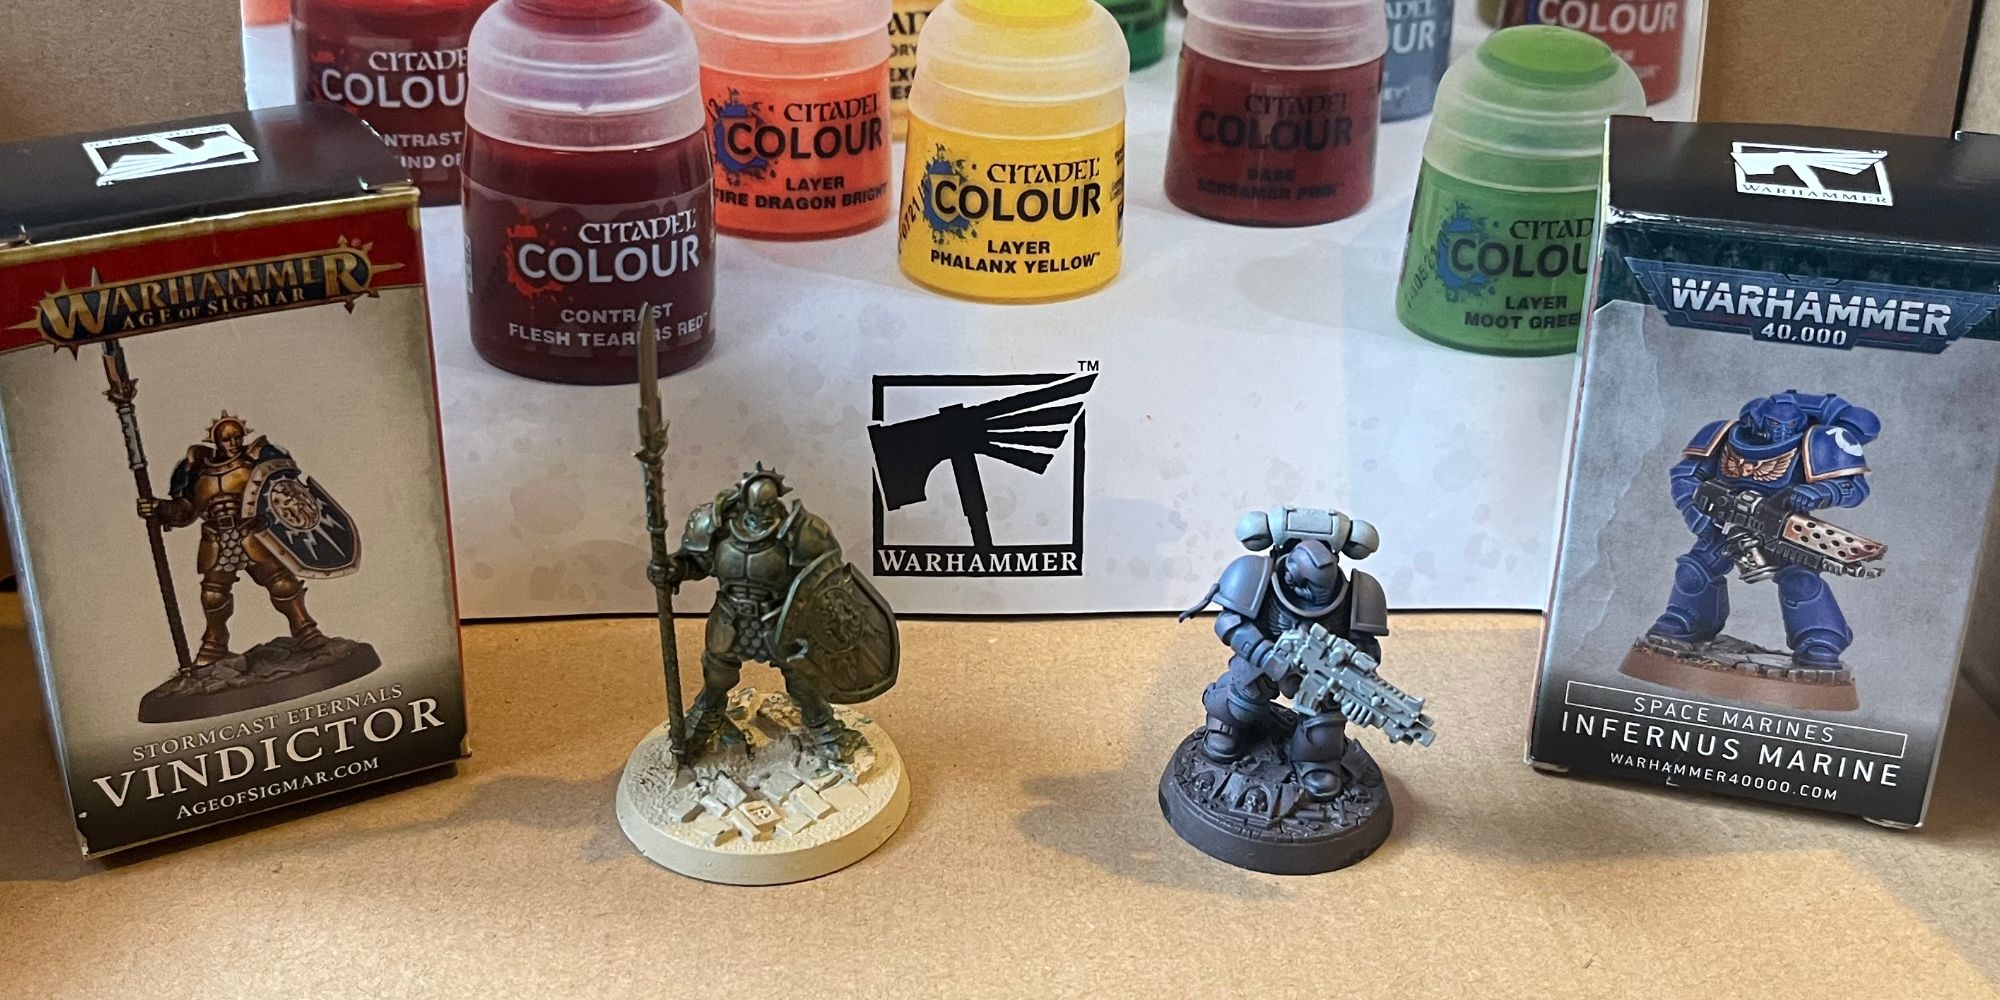 Warhammer painted space marine and vindictor miniatures in a box next to a small box with their names on